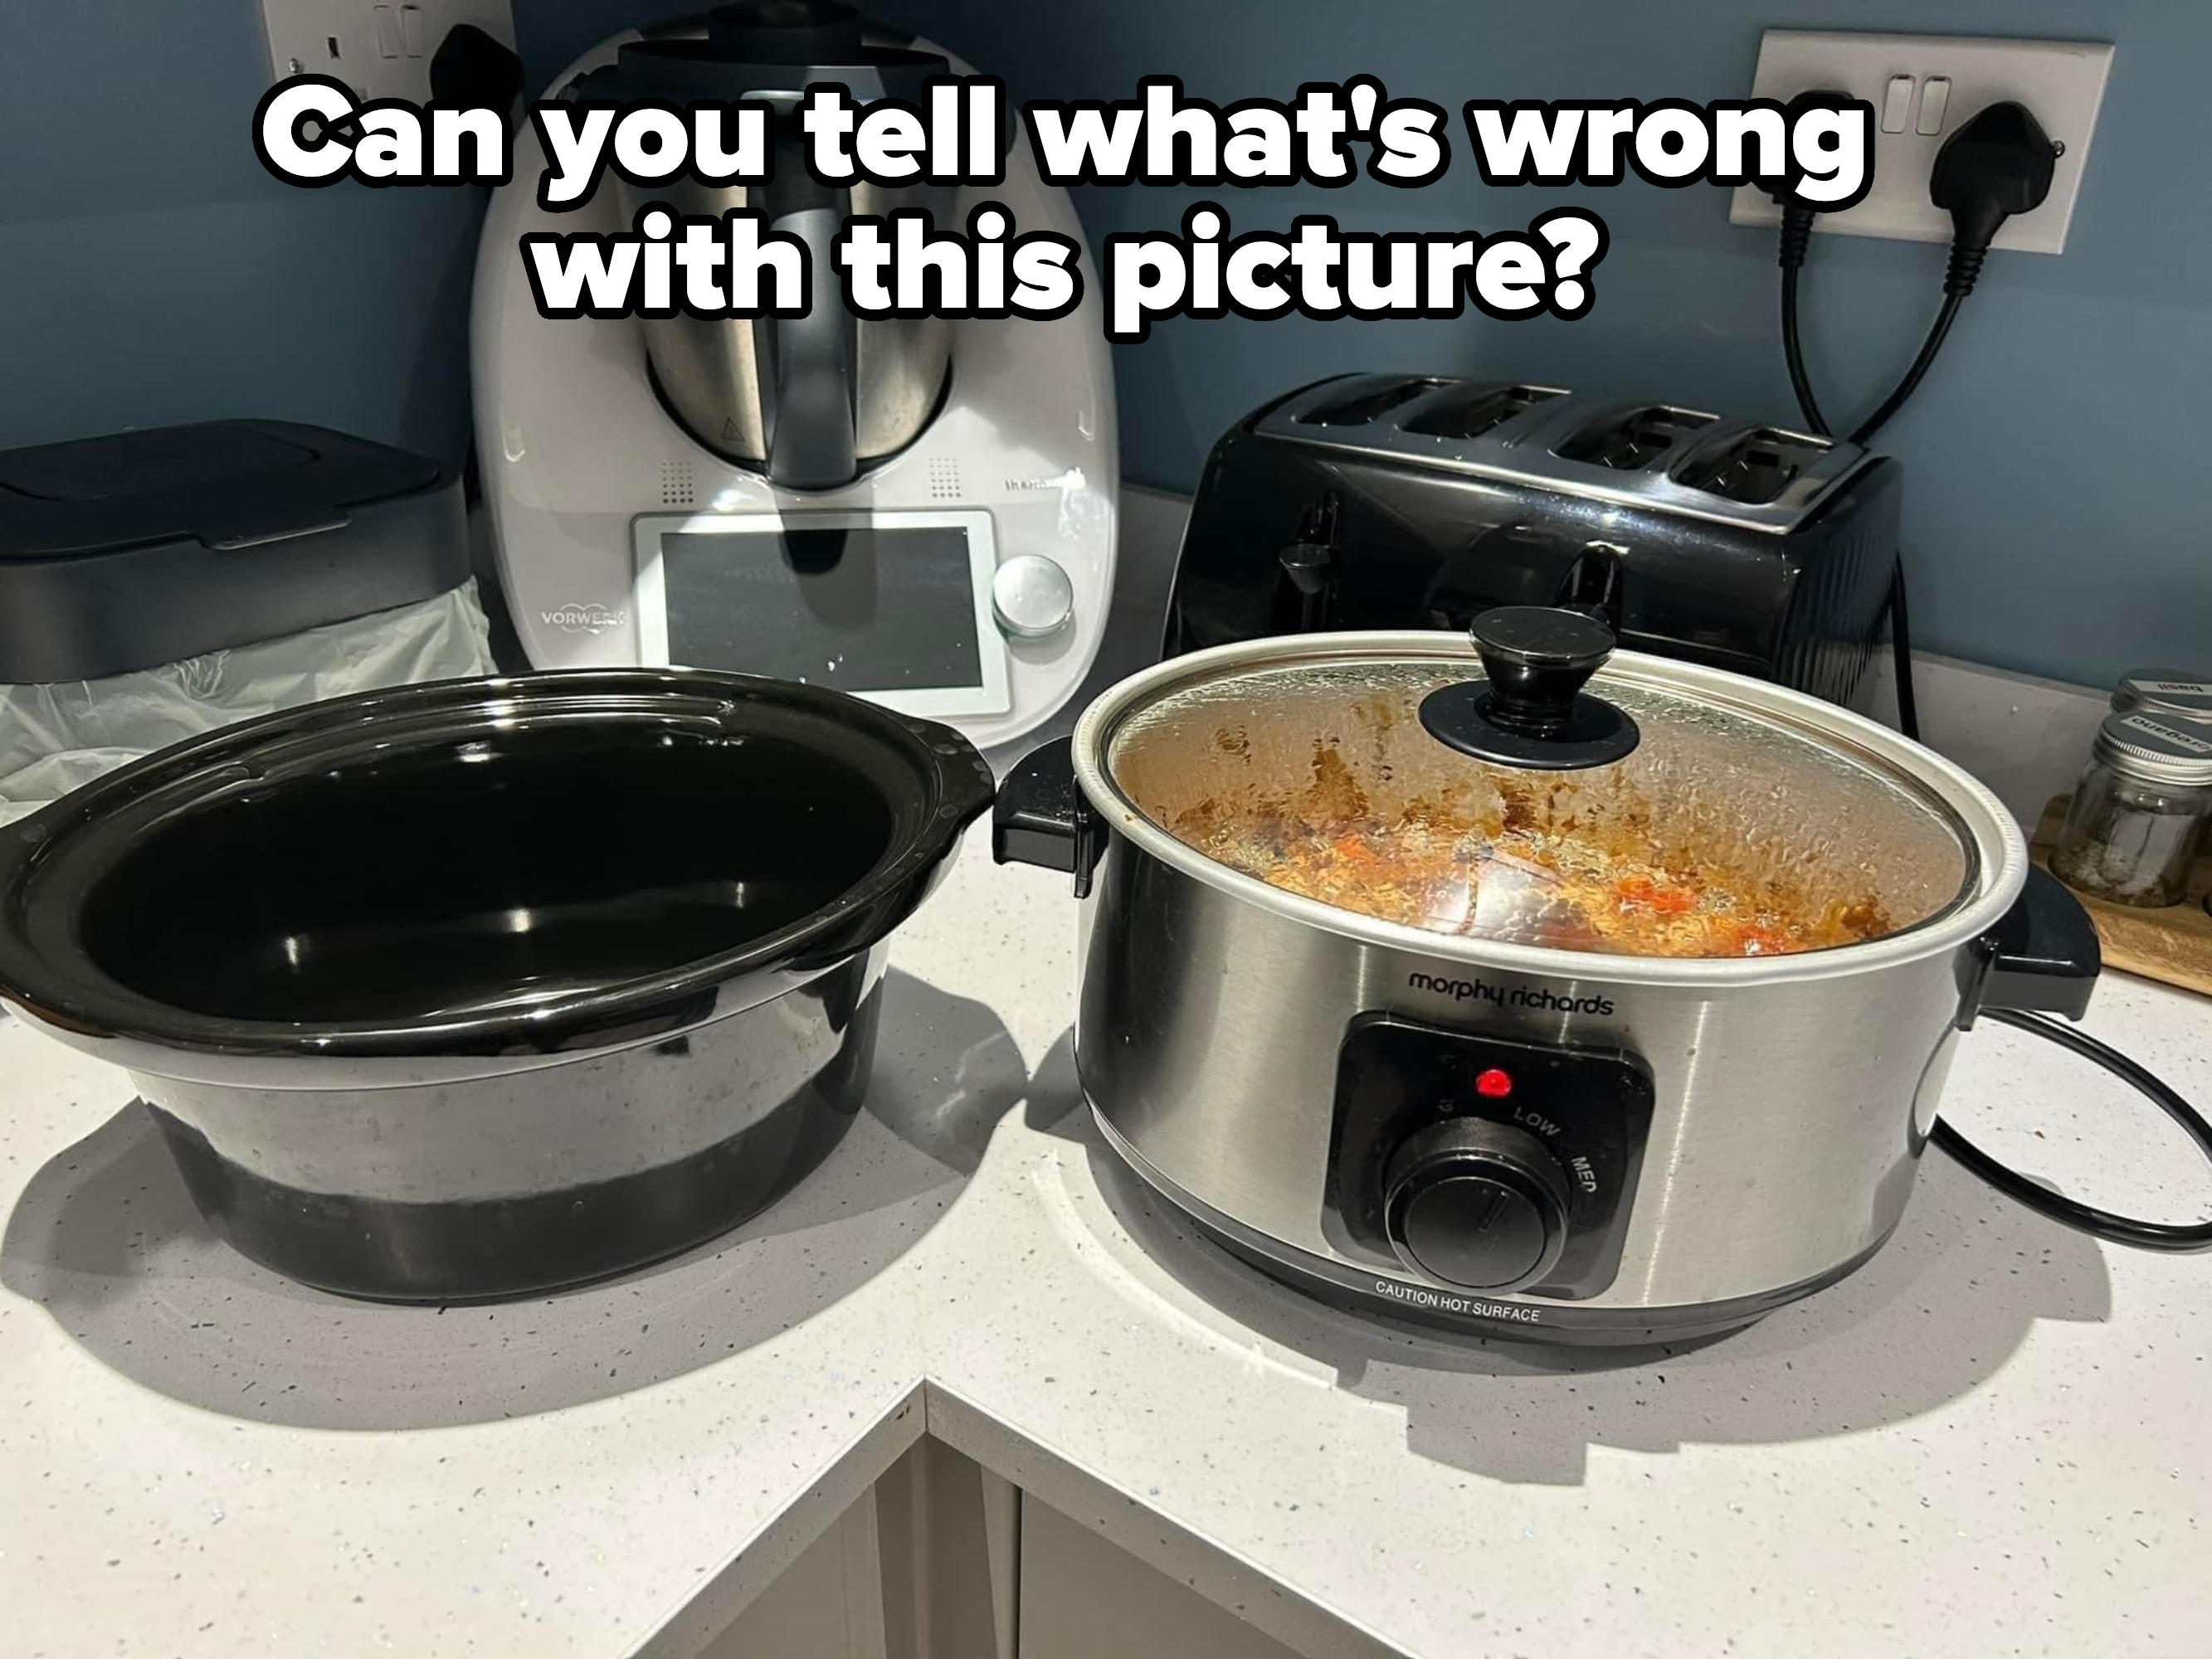 &quot;Can you tell what&#x27;s wrong with this picture?&quot; showing someone cooked something in an instant cooker without the pot insert